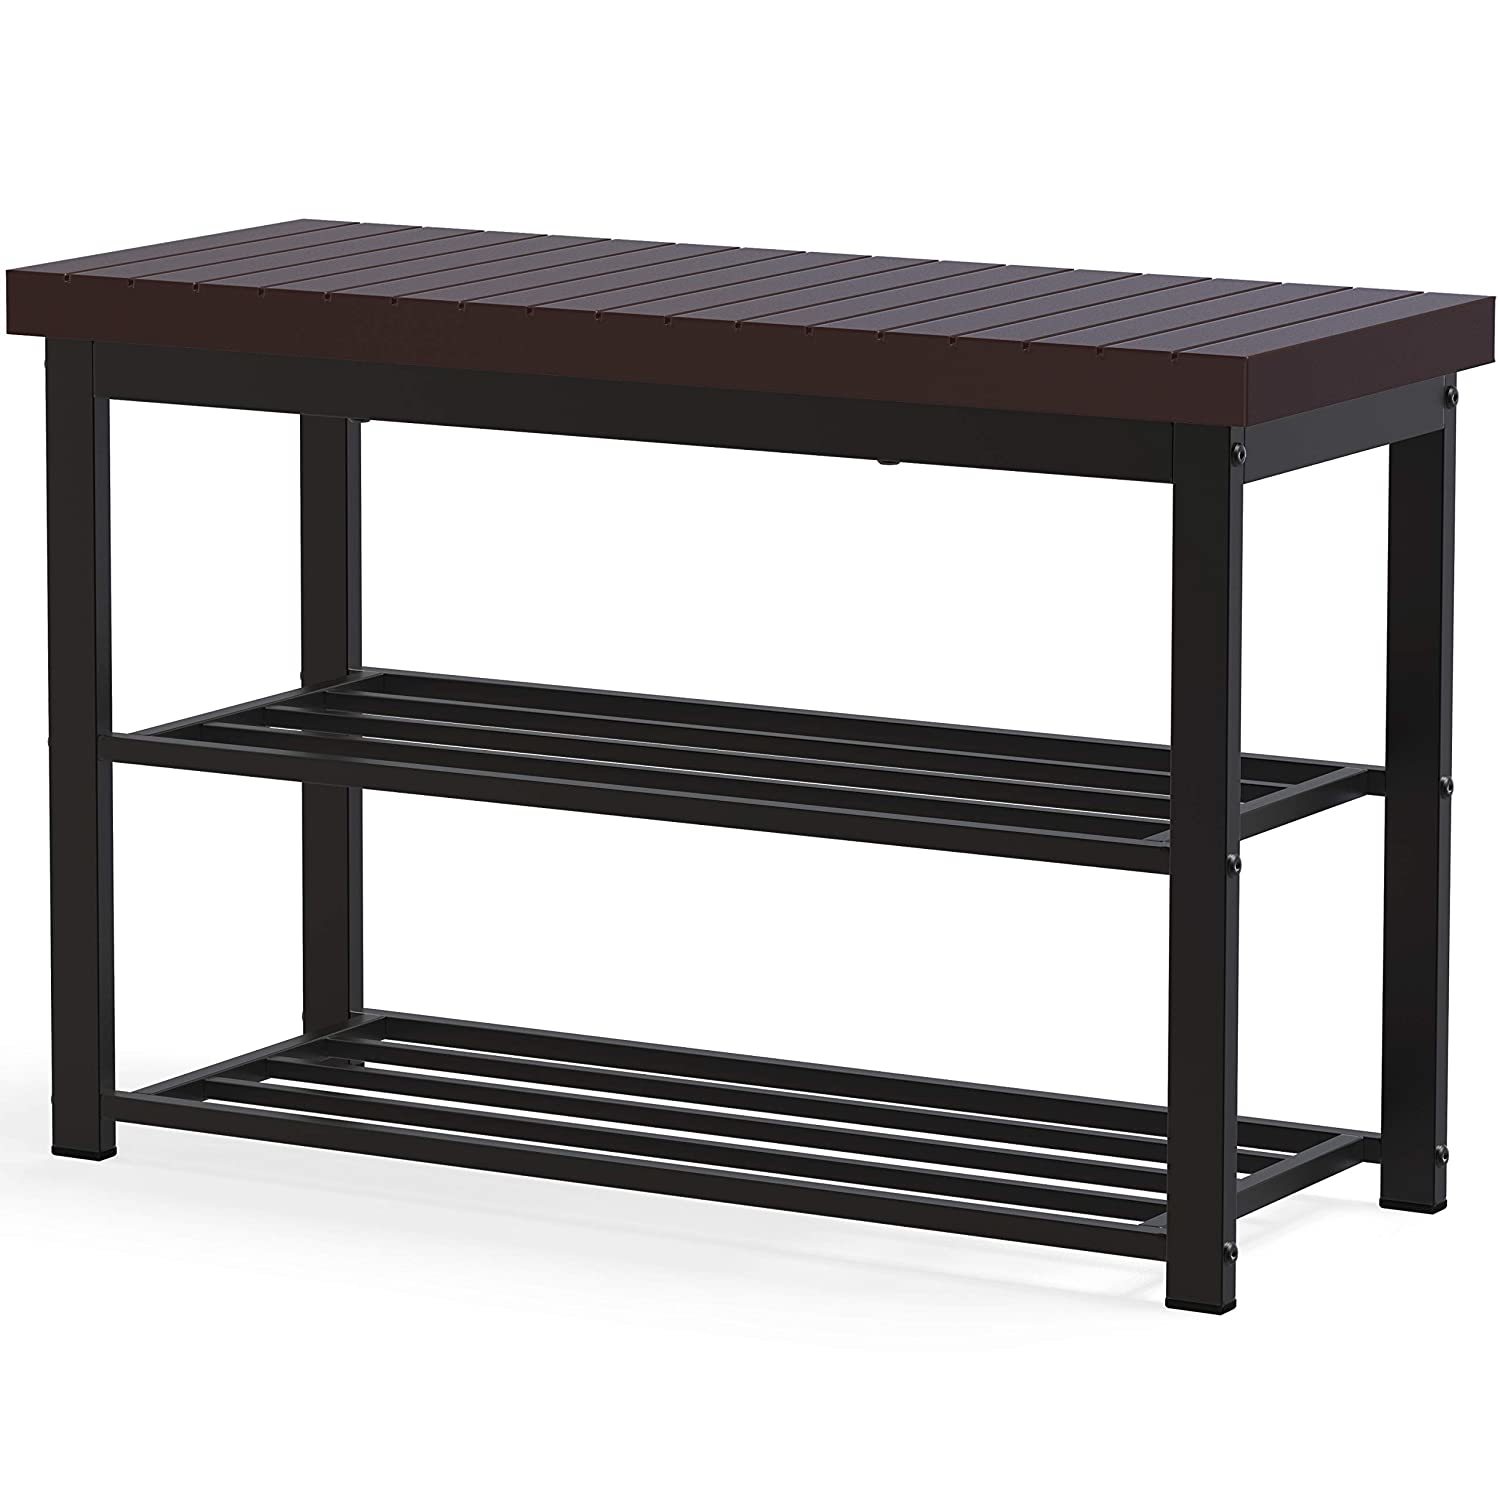 Simplehouseware Shoe Storage Bench For Entryway - $70.29